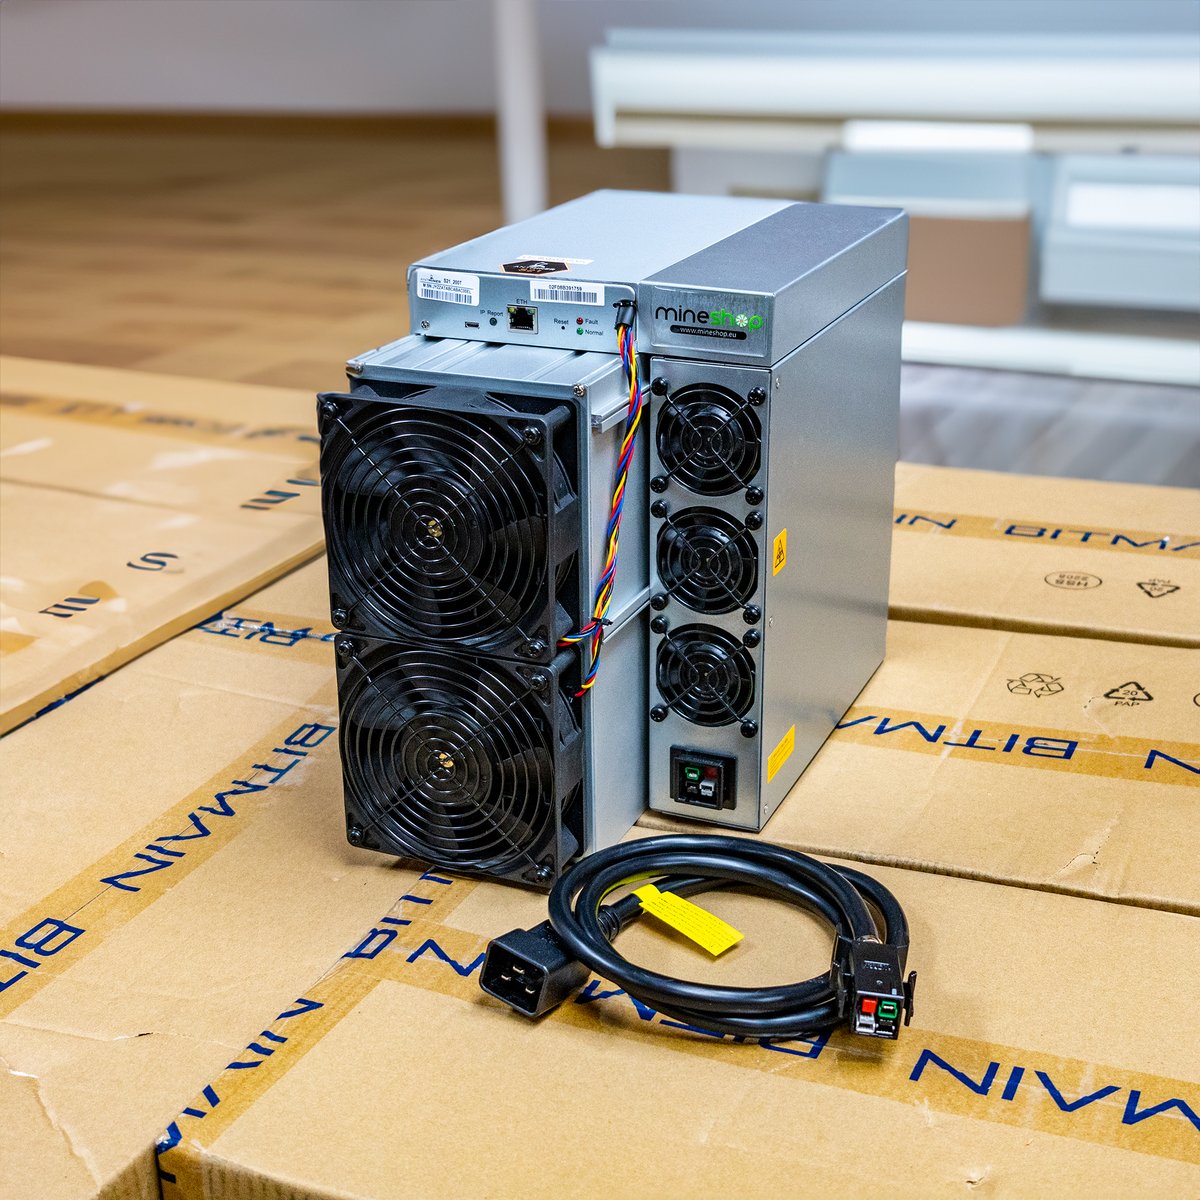 Exclusive offer: €500 off on the game-changing Antminer KS5! Code : KS500 mineshop.eu/antminer-ks5/